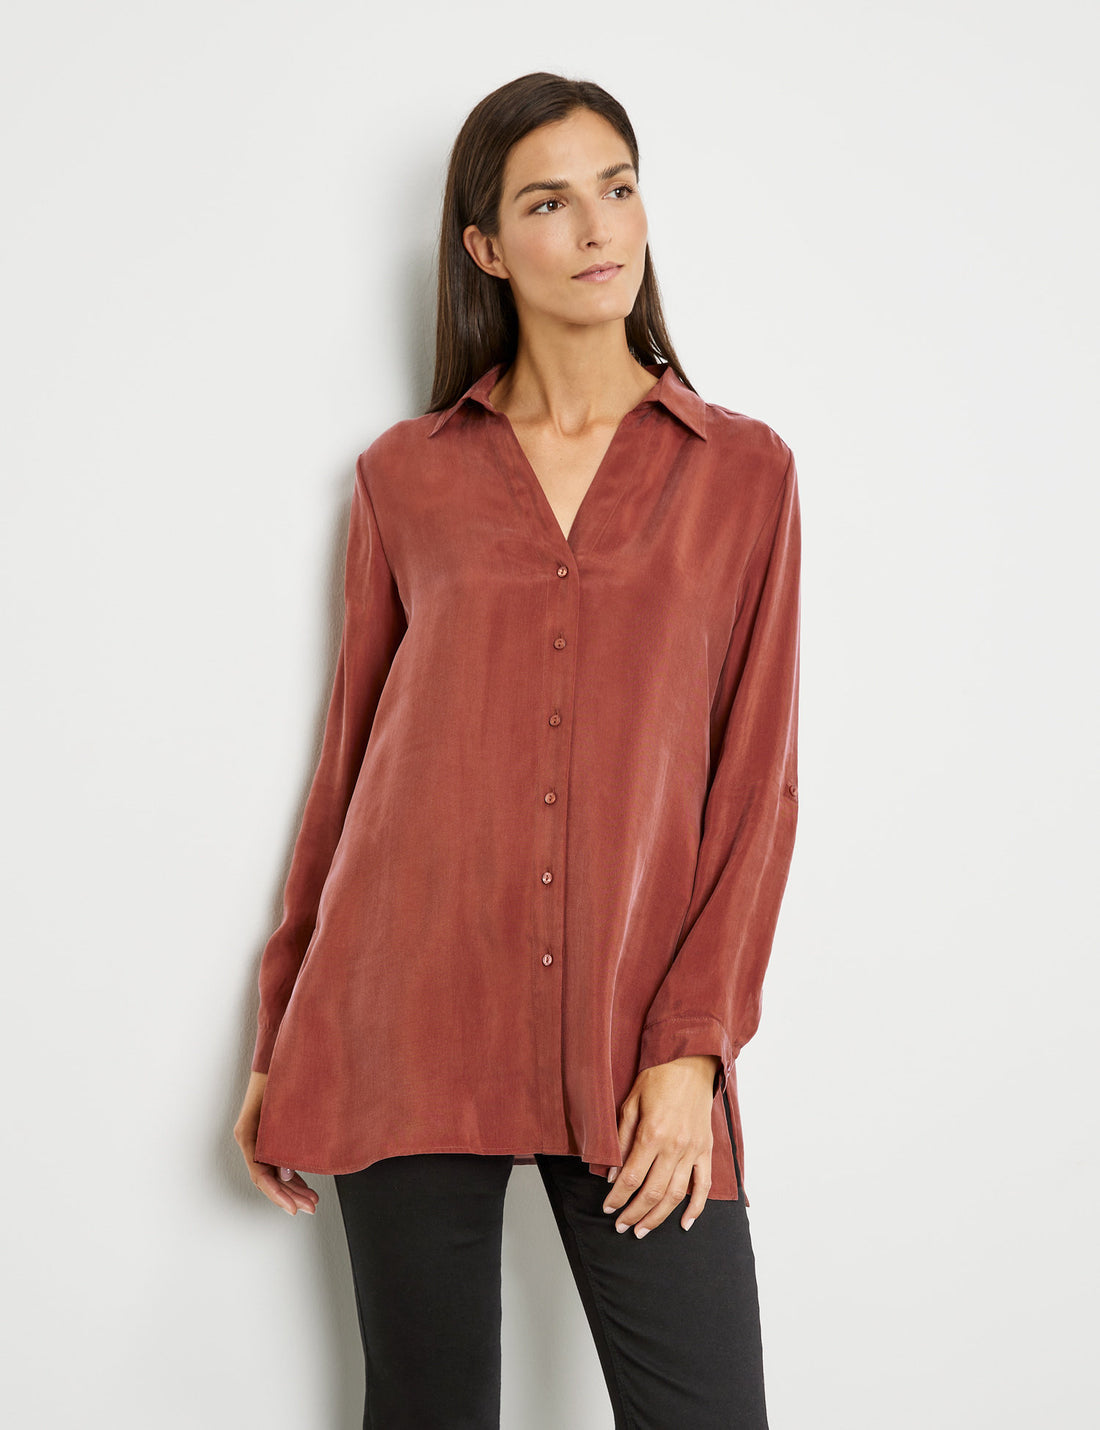 Long Blouse With Side Slits And Sleeve Straps_160019-66420_60703_01